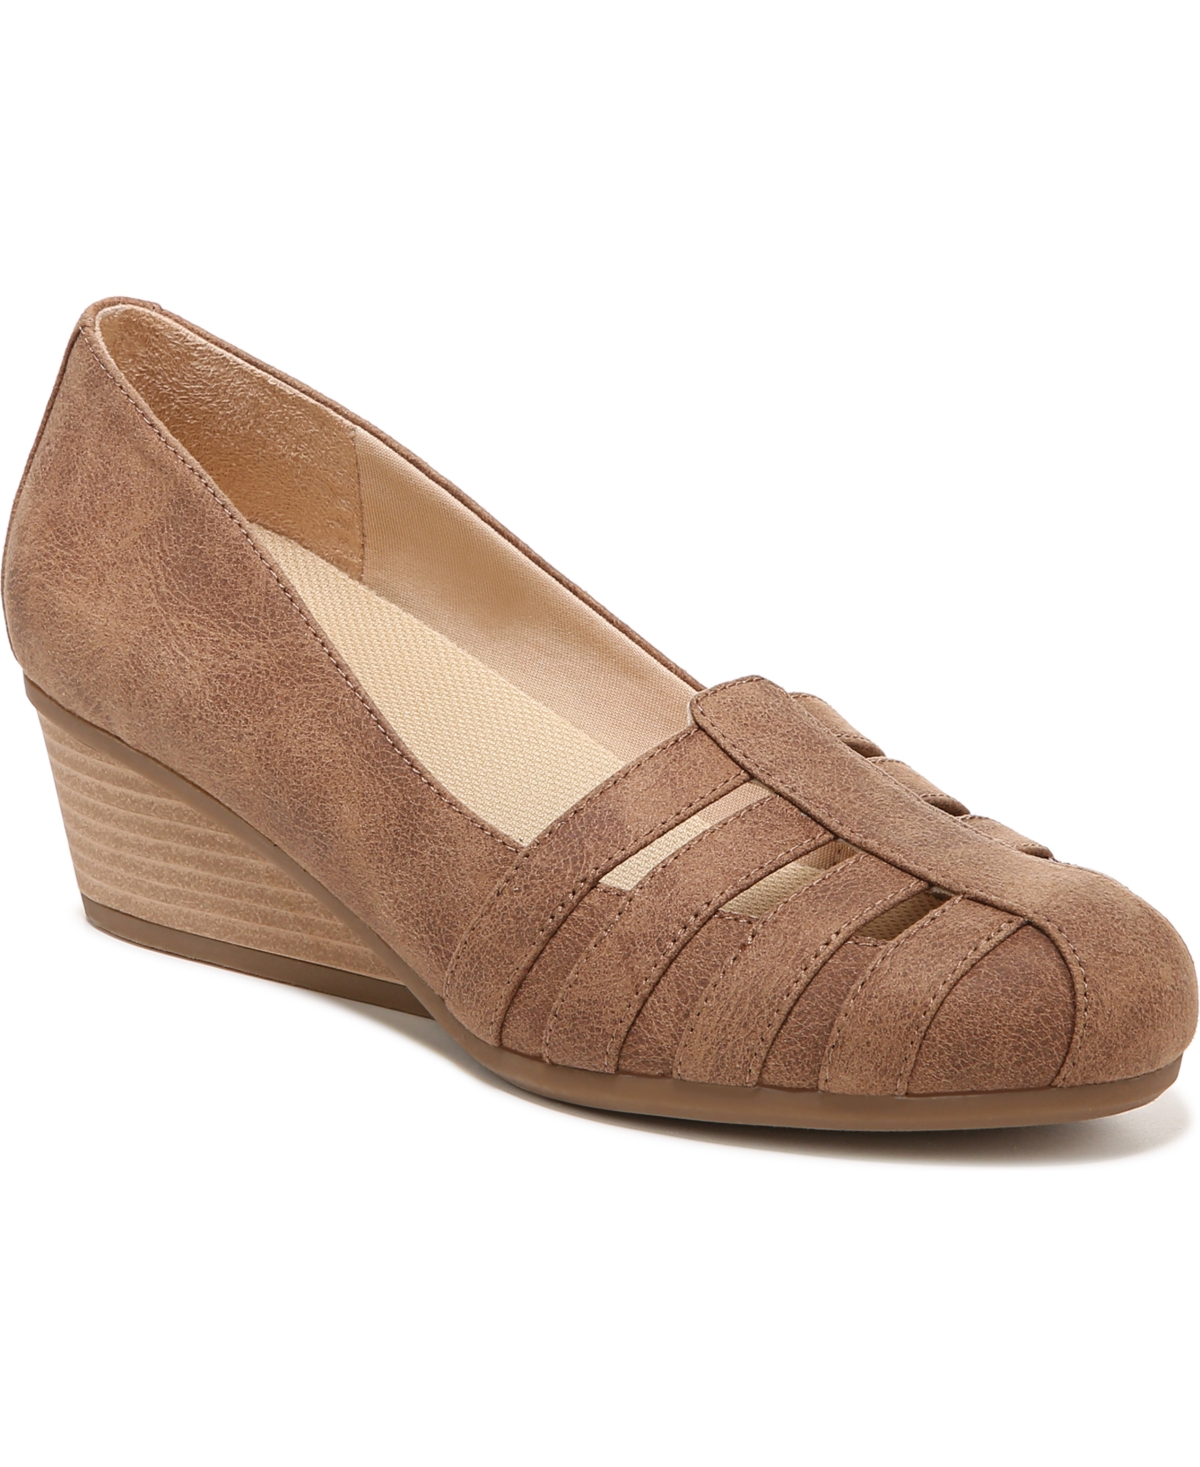 Women's Be Free Wedge Pumps - Sand Fabric